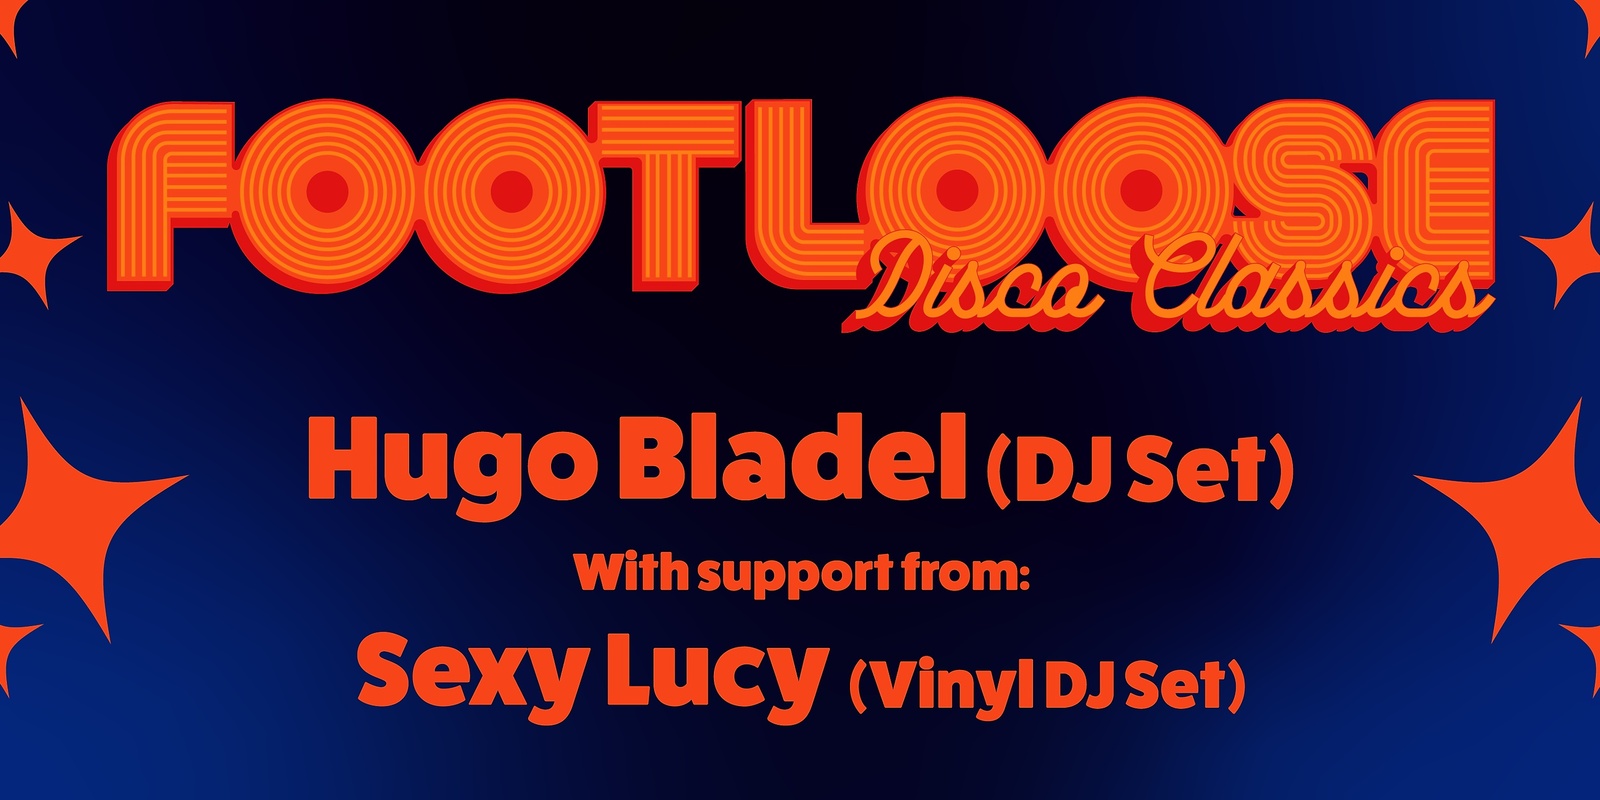 Banner image for Footloose Dance Party: Disco Classics